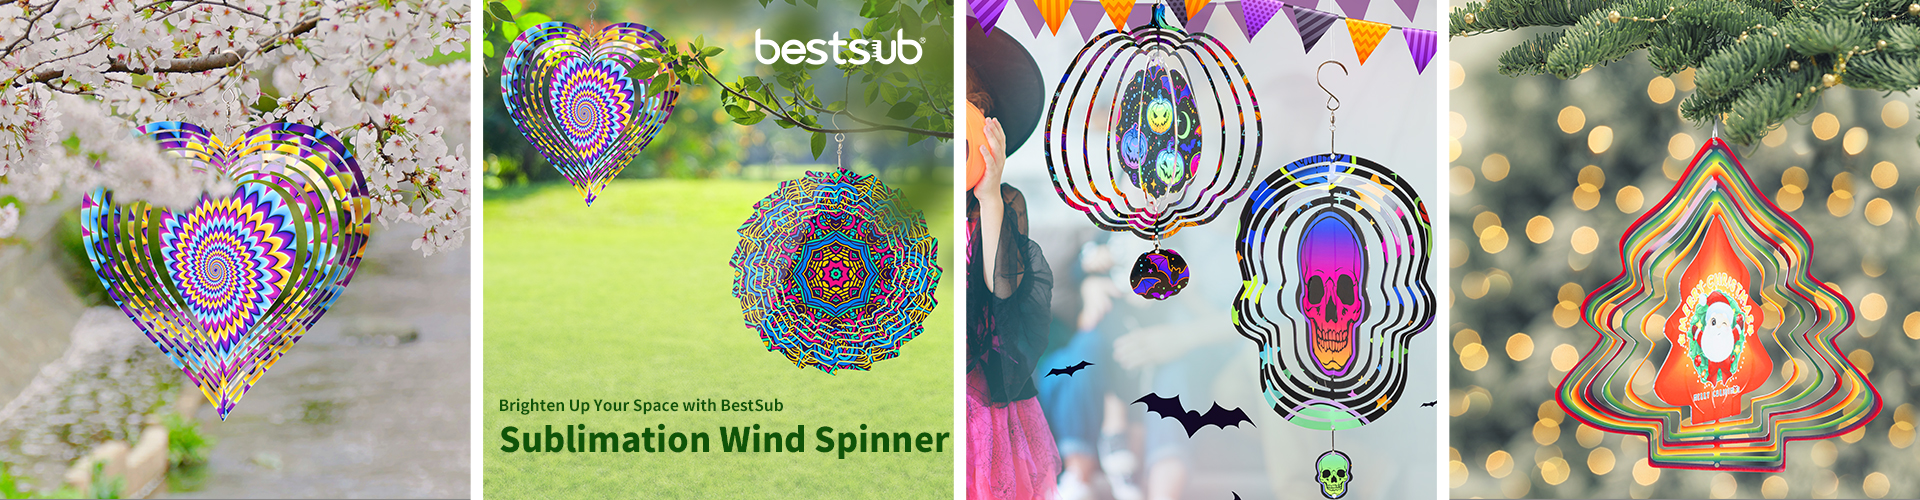 2022-08-12_Brighten_Up_Your_Space_with_BestSub_Sublimation_Wind_Spinner_new_web